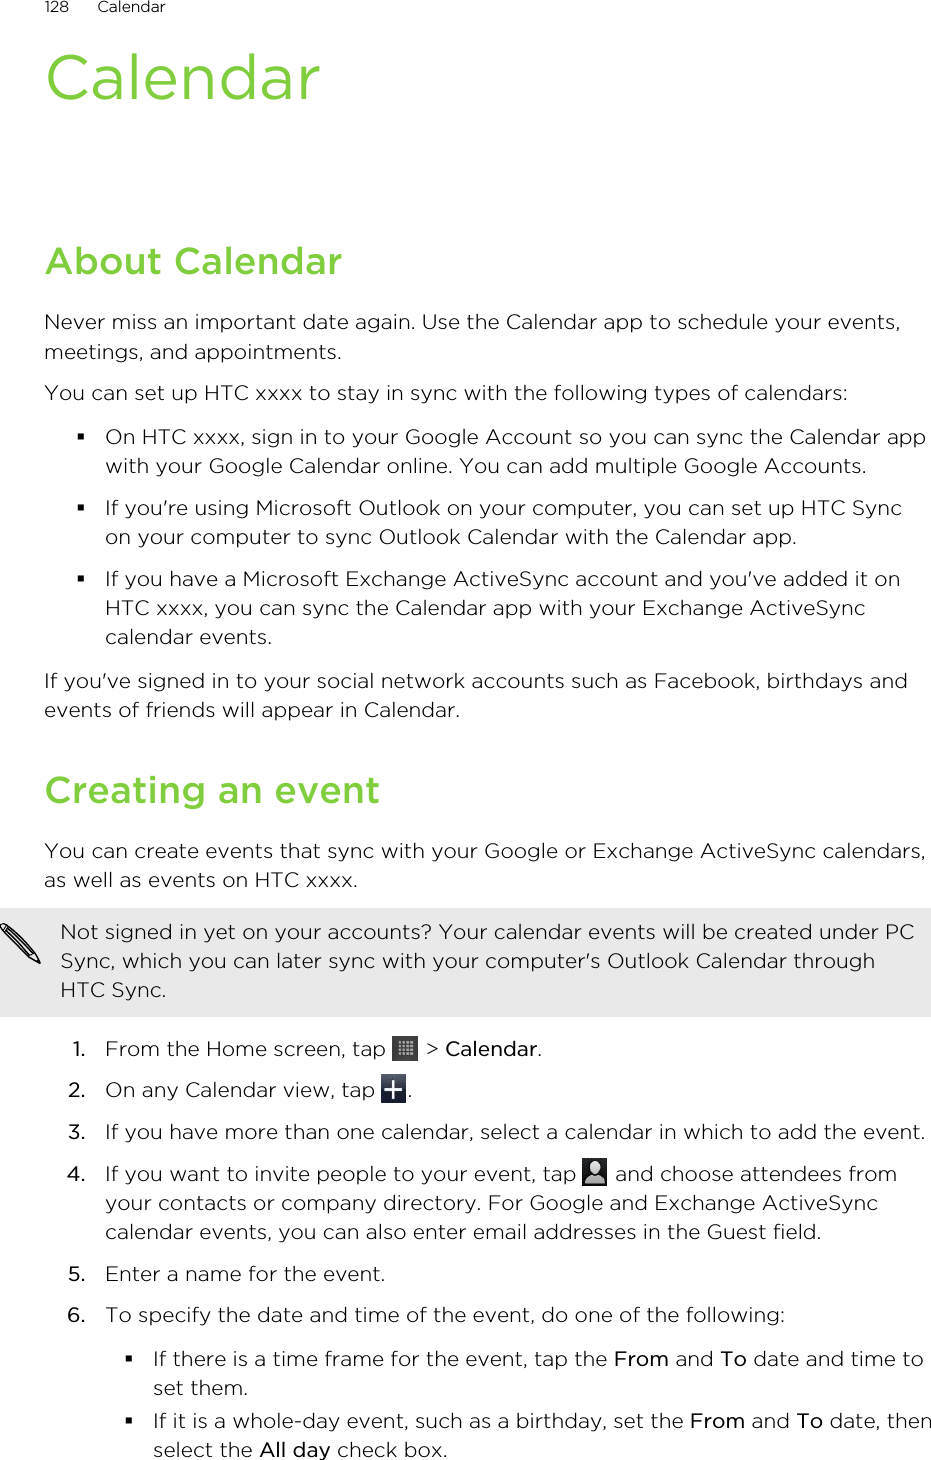 CalendarAbout CalendarNever miss an important date again. Use the Calendar app to schedule your events,meetings, and appointments.You can set up HTC xxxx to stay in sync with the following types of calendars:§On HTC xxxx, sign in to your Google Account so you can sync the Calendar appwith your Google Calendar online. You can add multiple Google Accounts.§If you&apos;re using Microsoft Outlook on your computer, you can set up HTC Syncon your computer to sync Outlook Calendar with the Calendar app.§If you have a Microsoft Exchange ActiveSync account and you&apos;ve added it onHTC xxxx, you can sync the Calendar app with your Exchange ActiveSynccalendar events.If you&apos;ve signed in to your social network accounts such as Facebook, birthdays andevents of friends will appear in Calendar.Creating an eventYou can create events that sync with your Google or Exchange ActiveSync calendars,as well as events on HTC xxxx.Not signed in yet on your accounts? Your calendar events will be created under PCSync, which you can later sync with your computer&apos;s Outlook Calendar throughHTC Sync.1. From the Home screen, tap   &gt; Calendar.2. On any Calendar view, tap  .3. If you have more than one calendar, select a calendar in which to add the event.4. If you want to invite people to your event, tap   and choose attendees fromyour contacts or company directory. For Google and Exchange ActiveSynccalendar events, you can also enter email addresses in the Guest field.5. Enter a name for the event.6. To specify the date and time of the event, do one of the following:§If there is a time frame for the event, tap the From and To date and time toset them.§If it is a whole-day event, such as a birthday, set the From and To date, thenselect the All day check box.128 Calendar